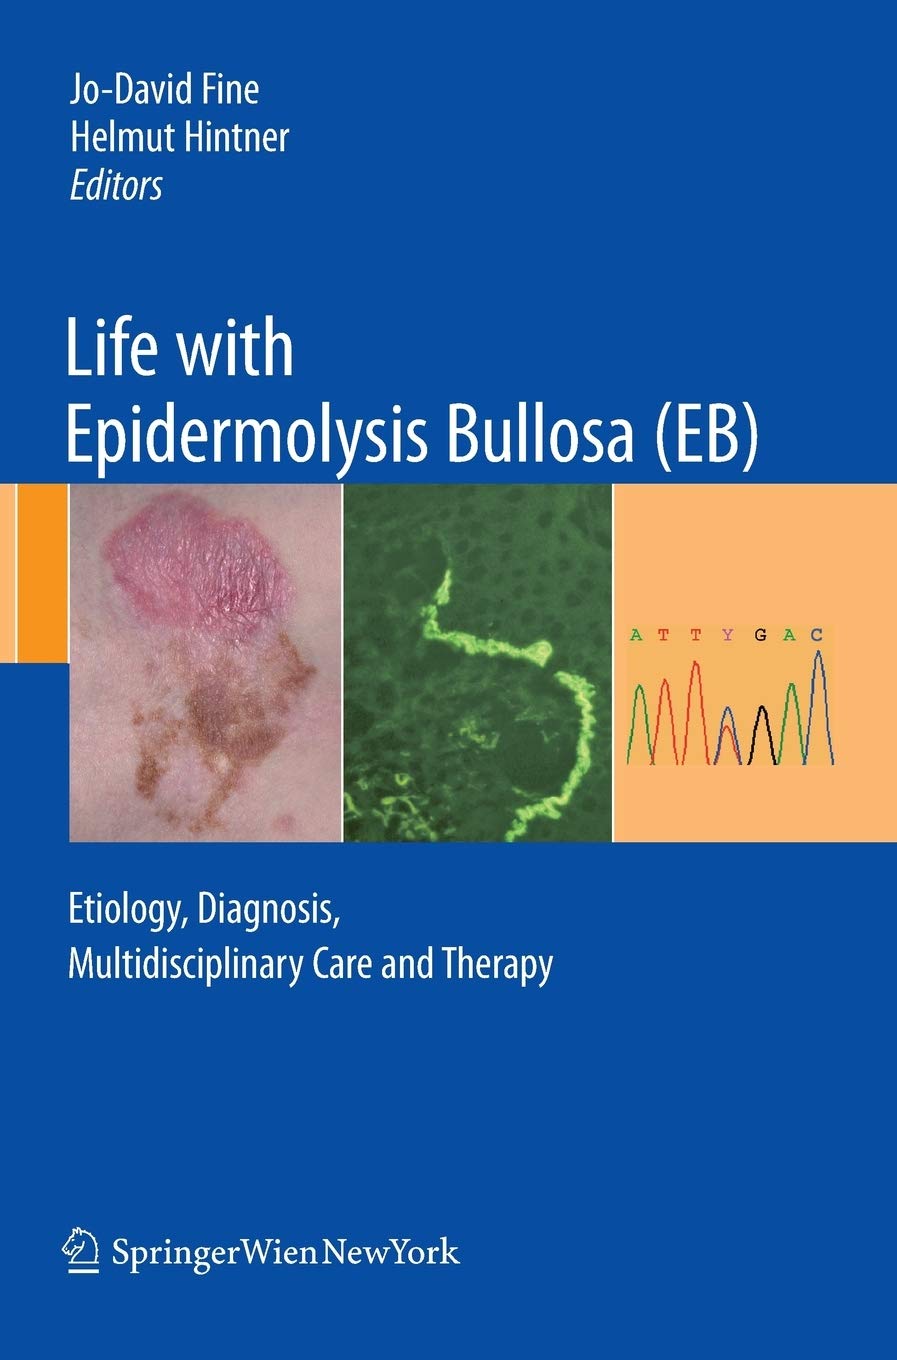 (EBook PDF)Life with Epidermolysis Bullosa (EB) Etiology, Diagnosis, Multidisciplinary Care and Therapy 2009th Edition by Jo-David Fine, Helmut Hintner